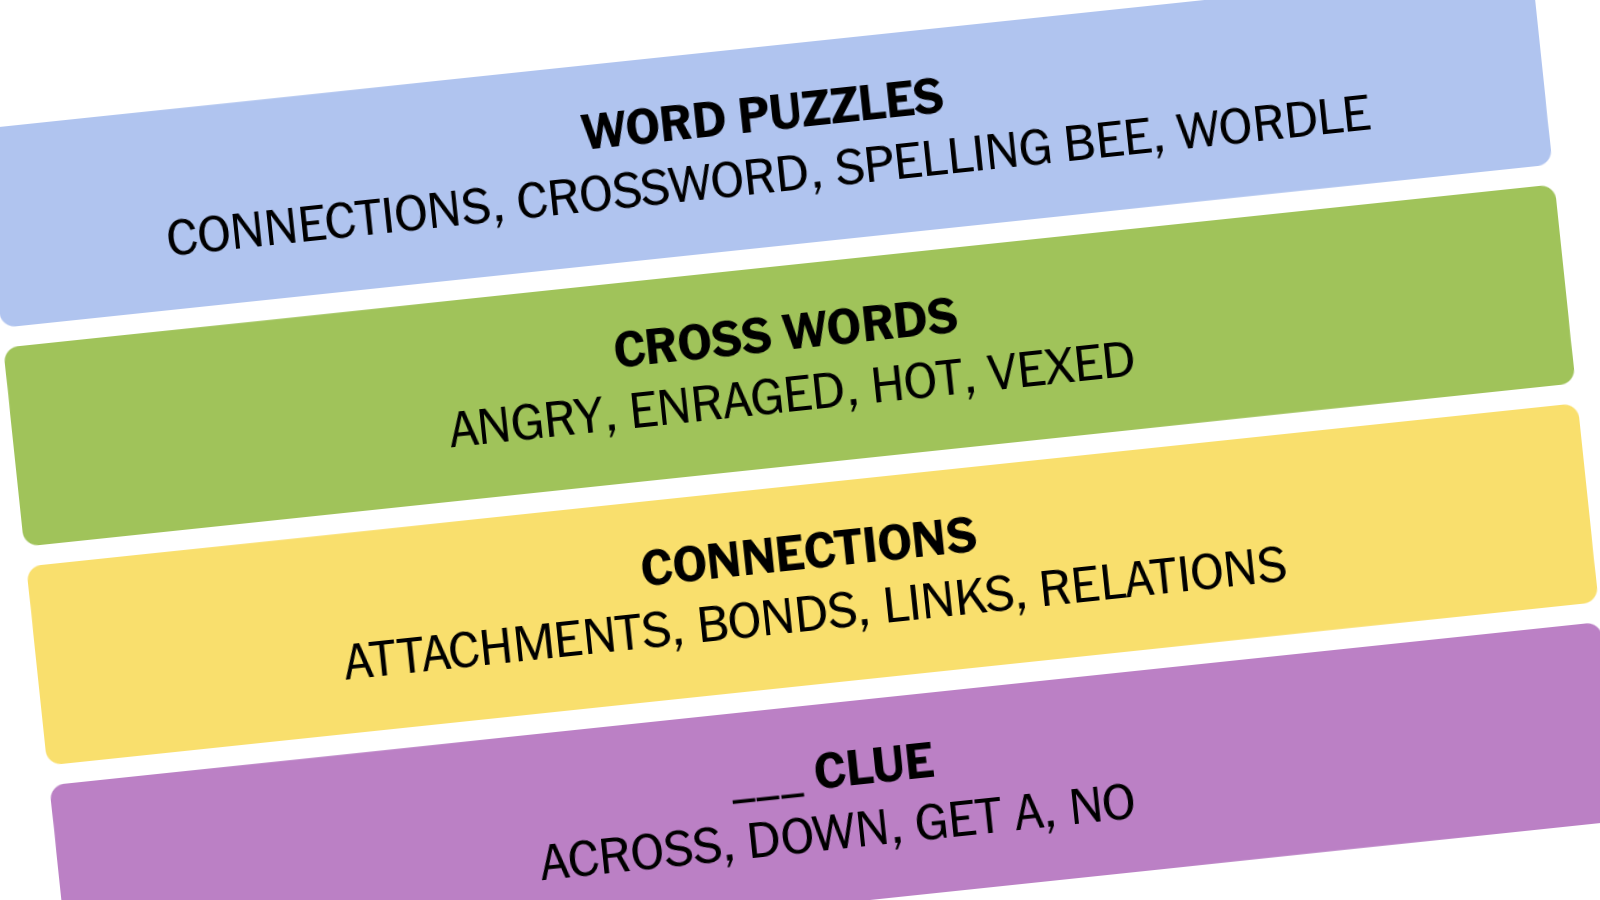 Connections: the crossword